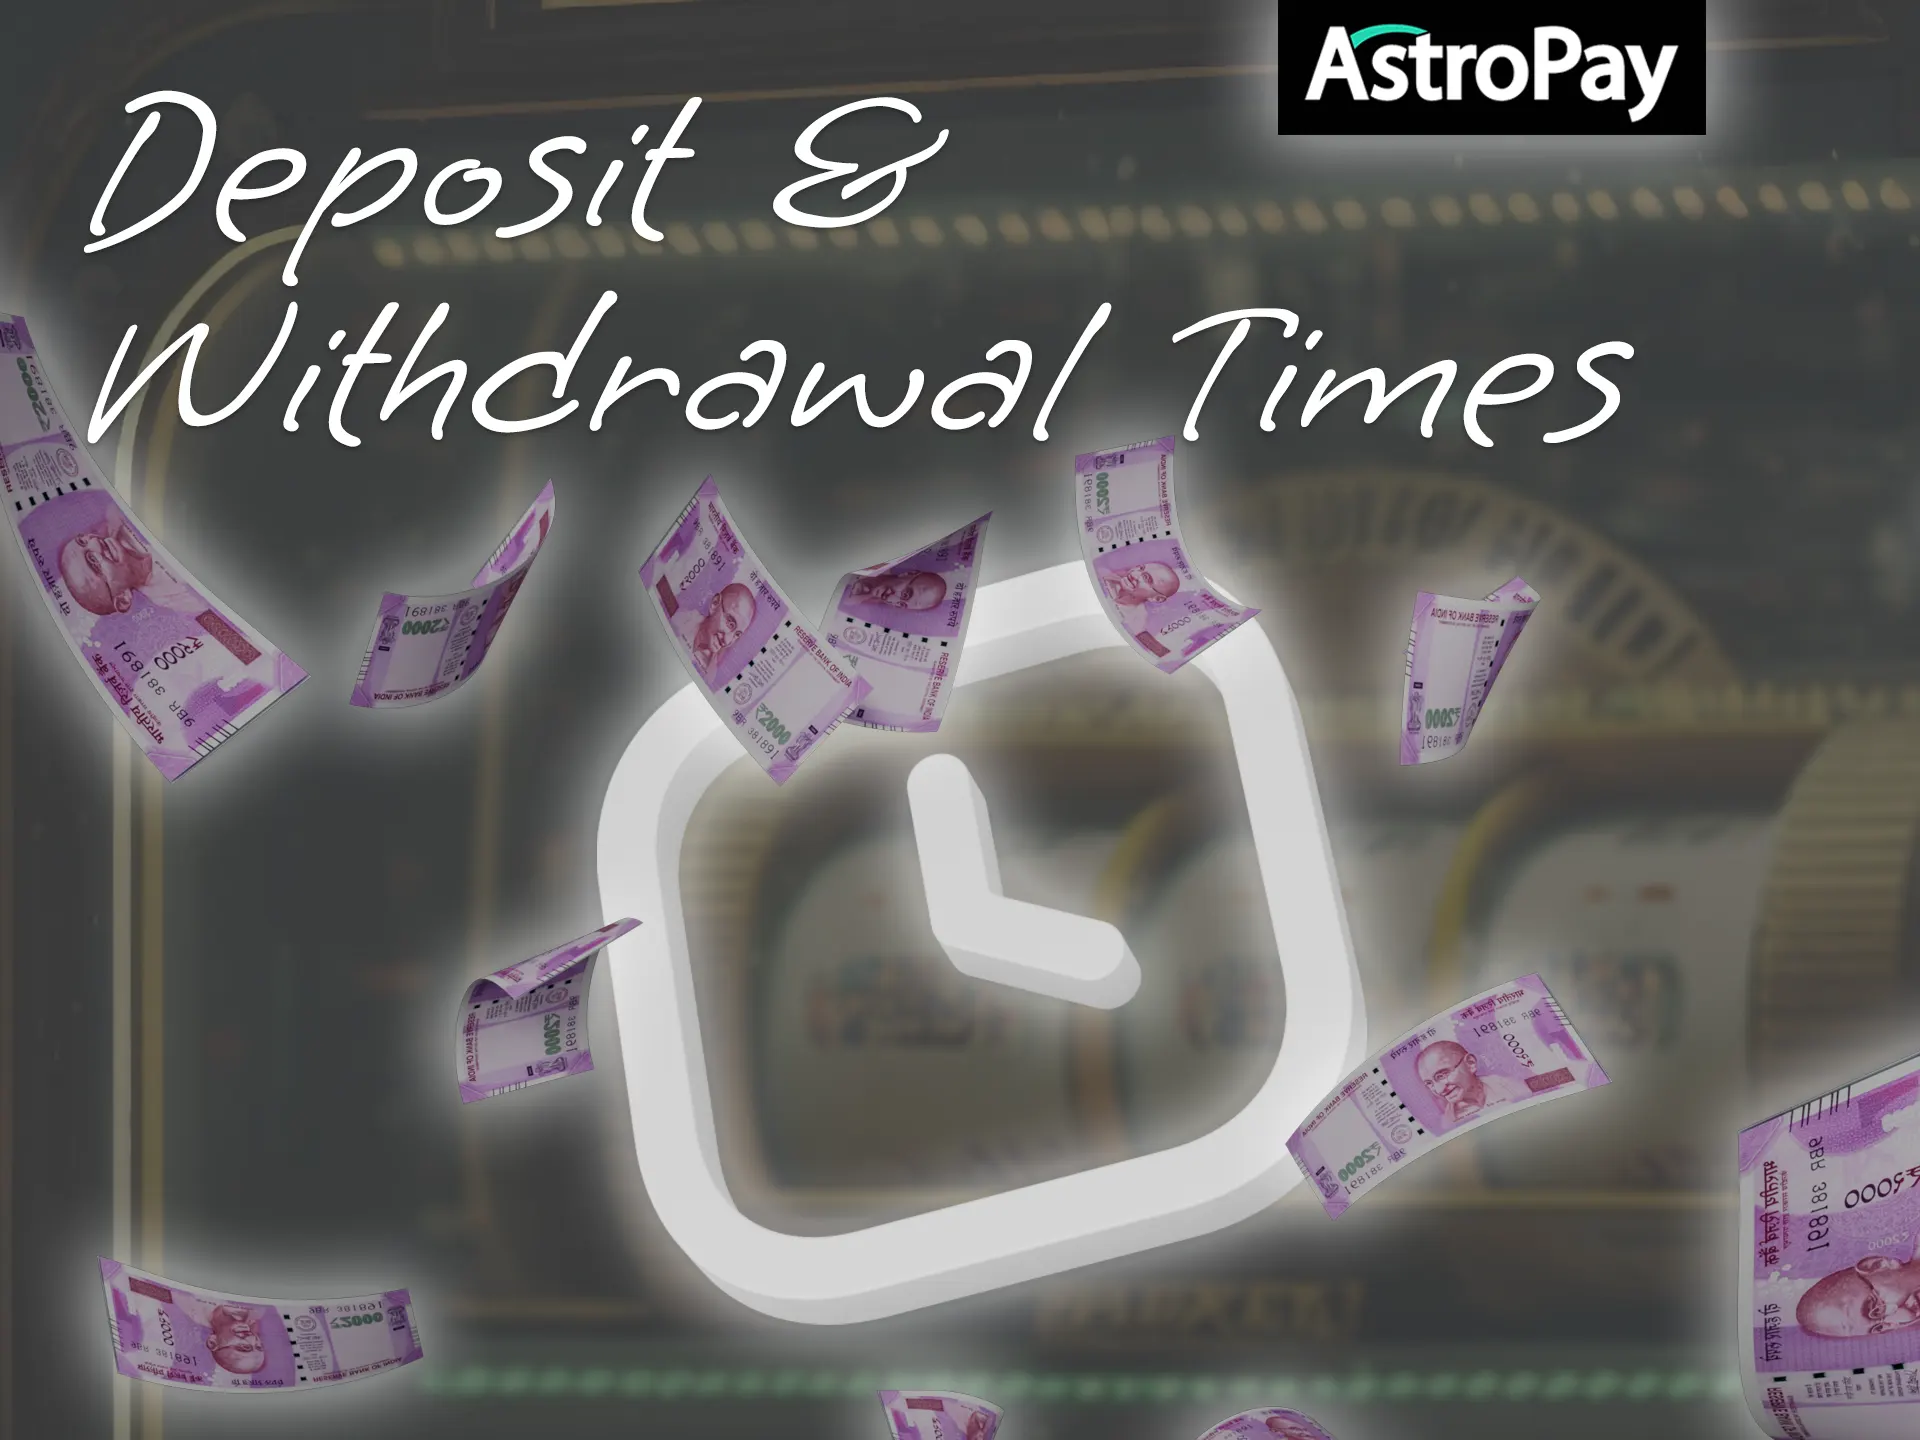 Make money transfers fast and easy with AstroPay.